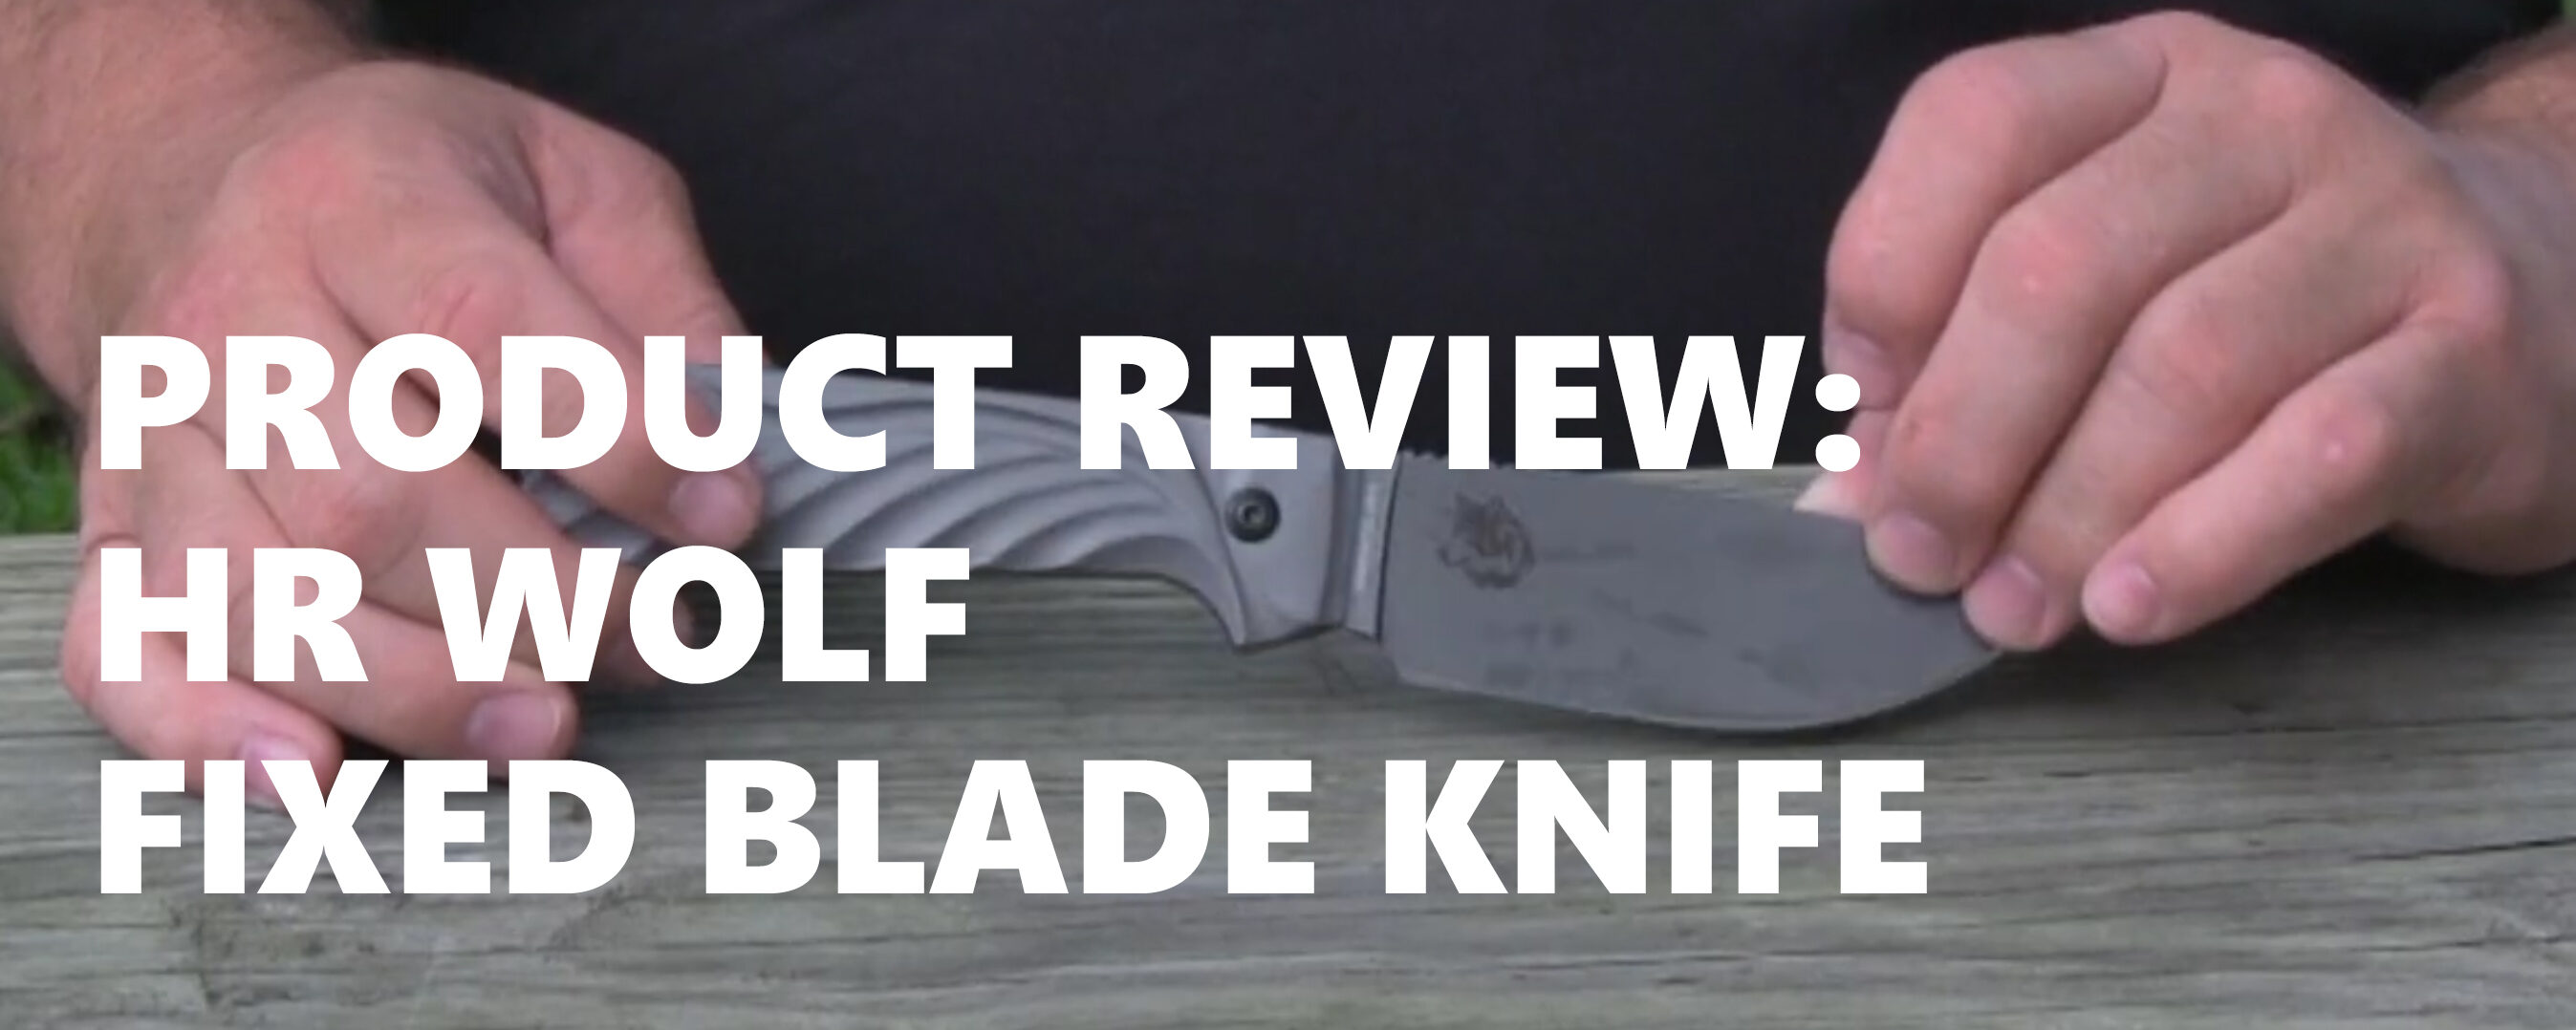 Product Review: HR Wolf Fixed Blade Knife